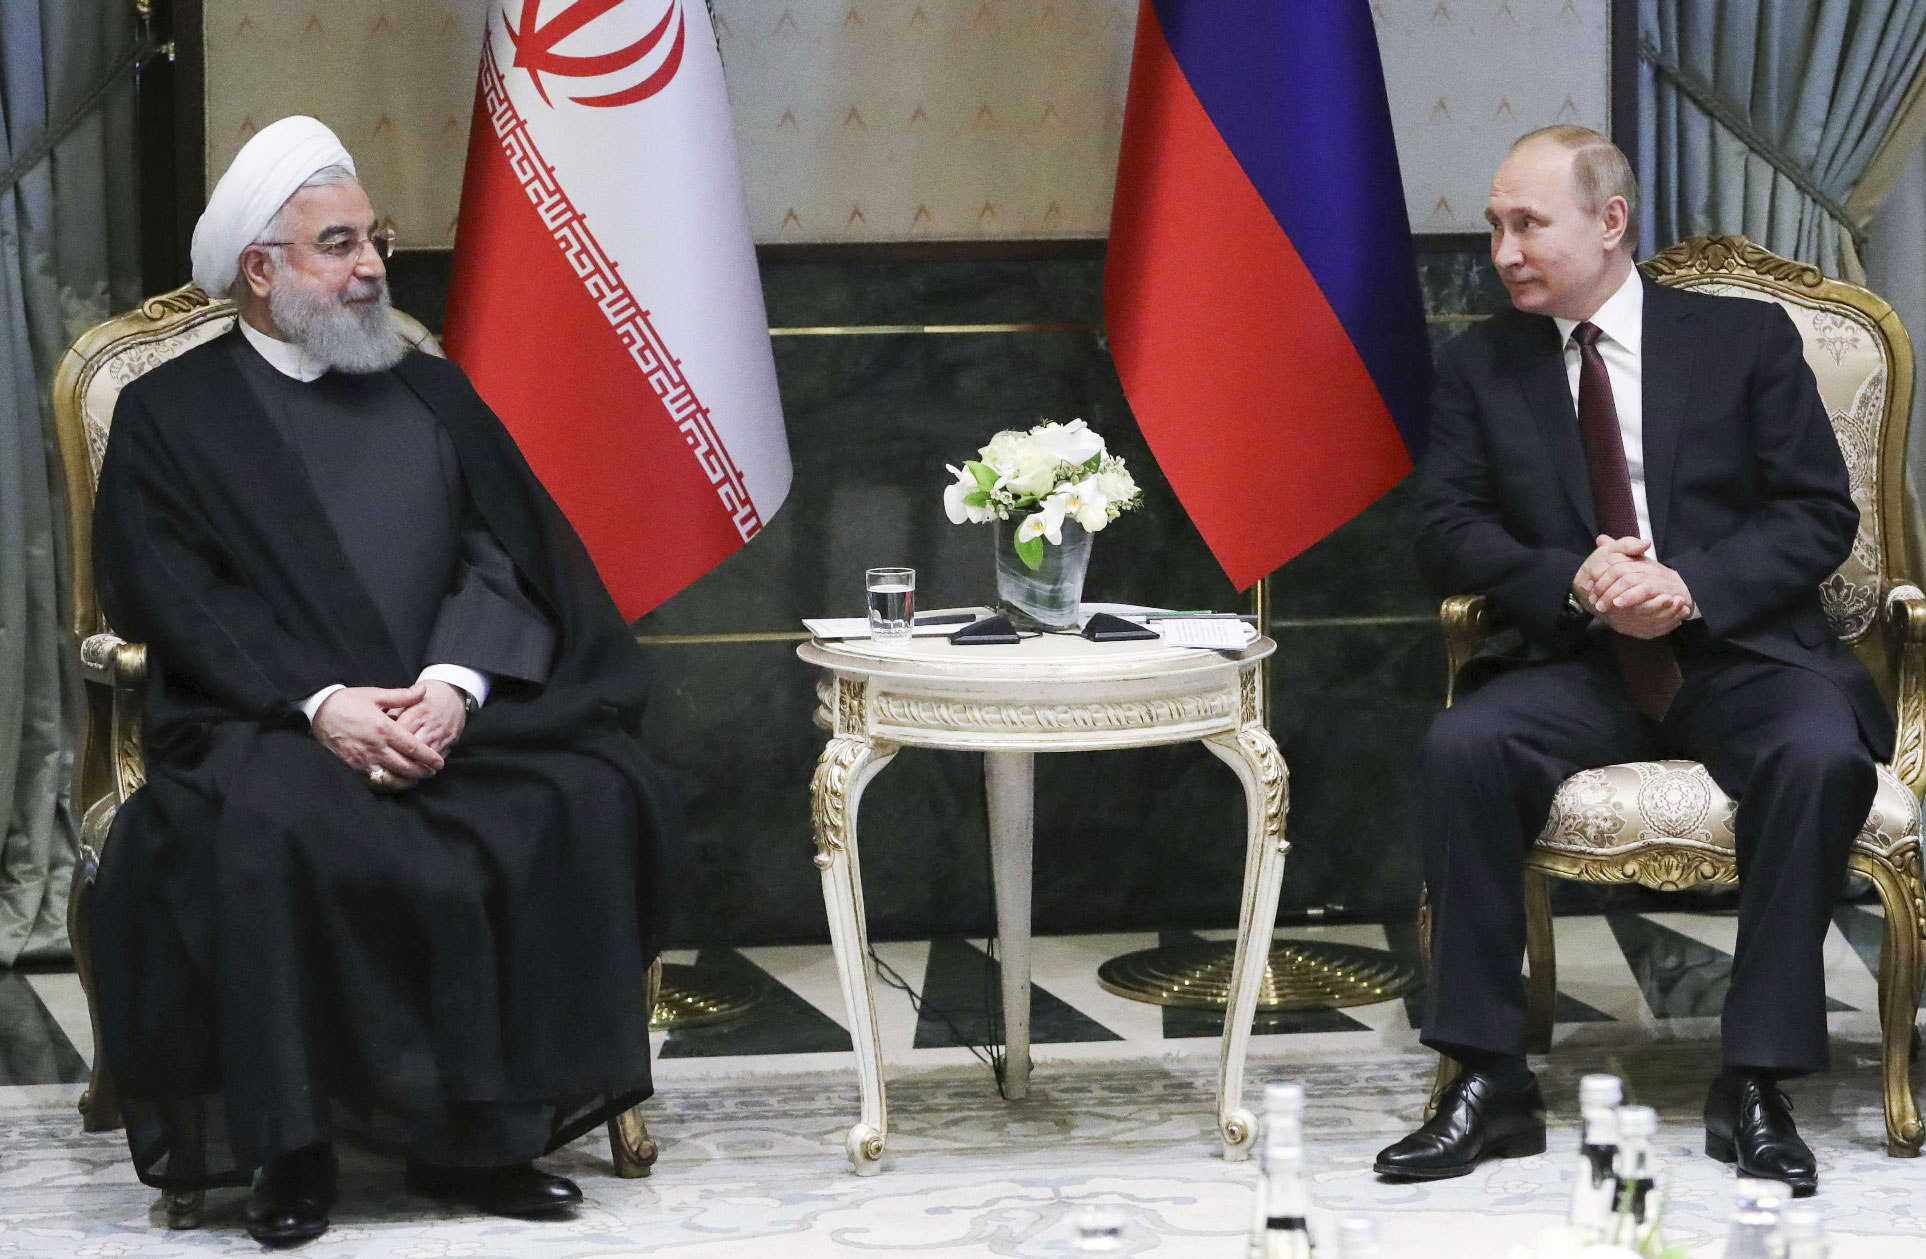 Now that the Syrian wars are winding down, Russia is caught between Iran and Israel.